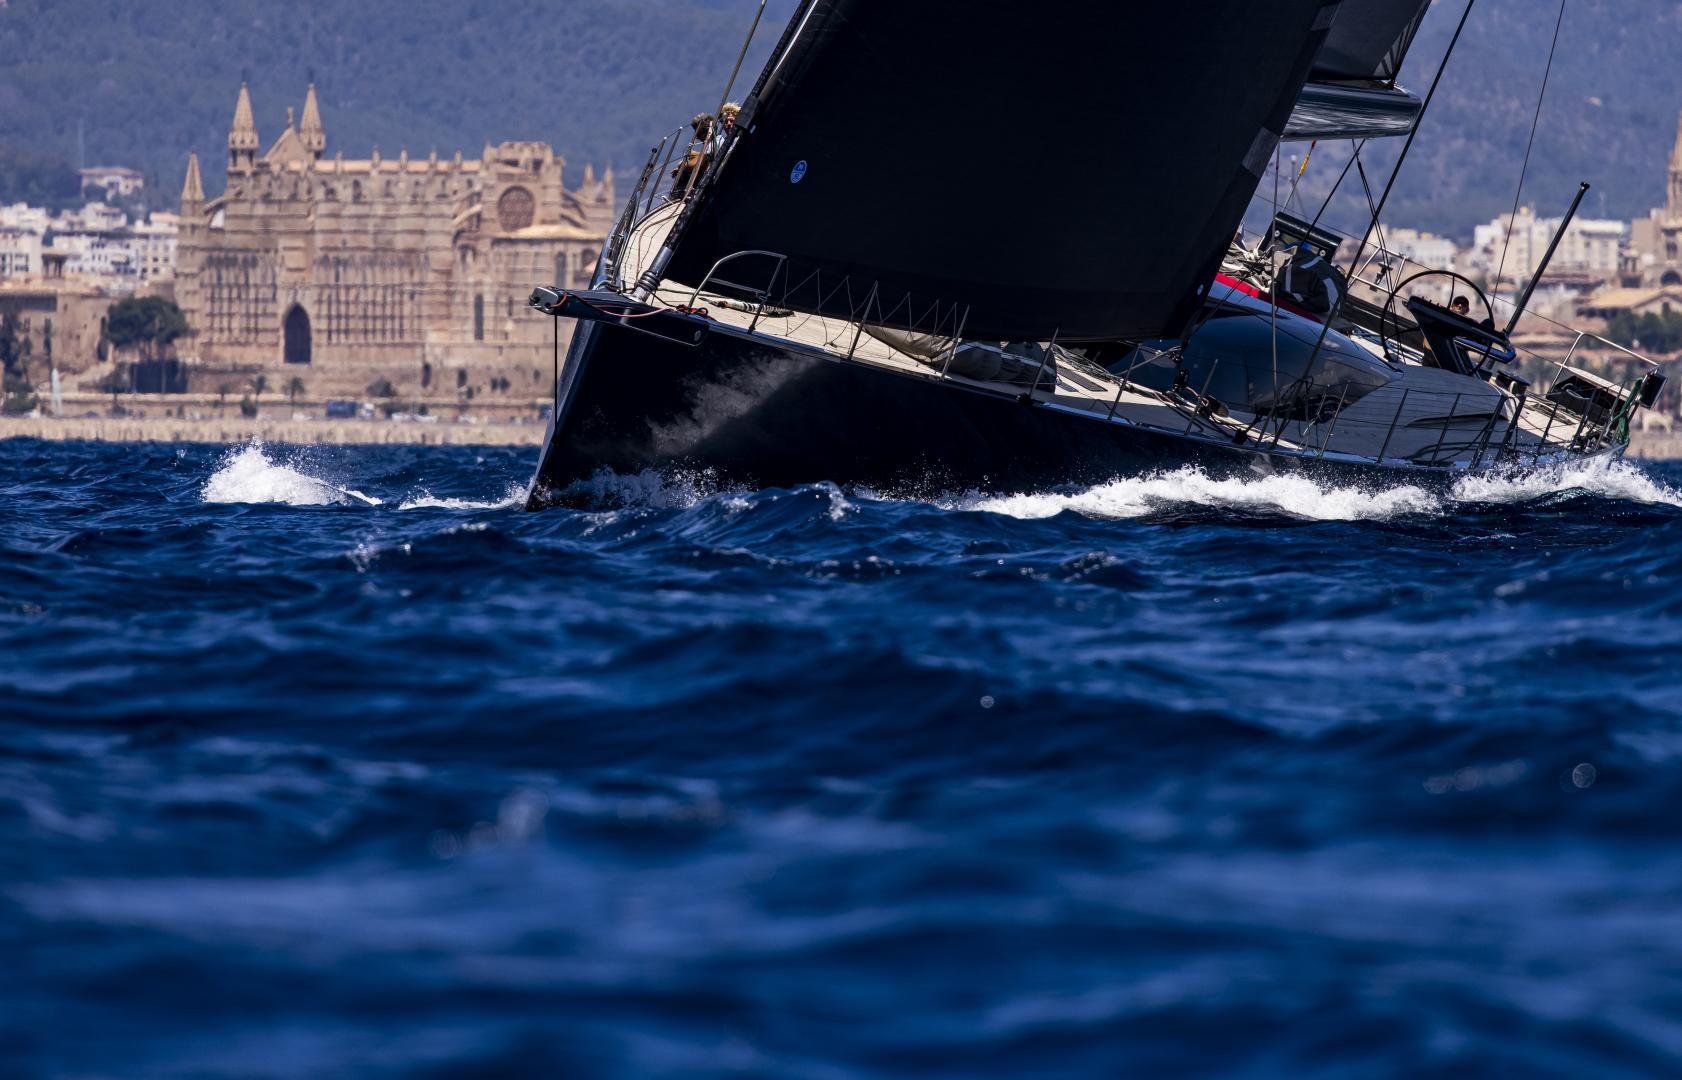 It’s all systems go as Superyacht Cup Palma 2022 starts to take shape